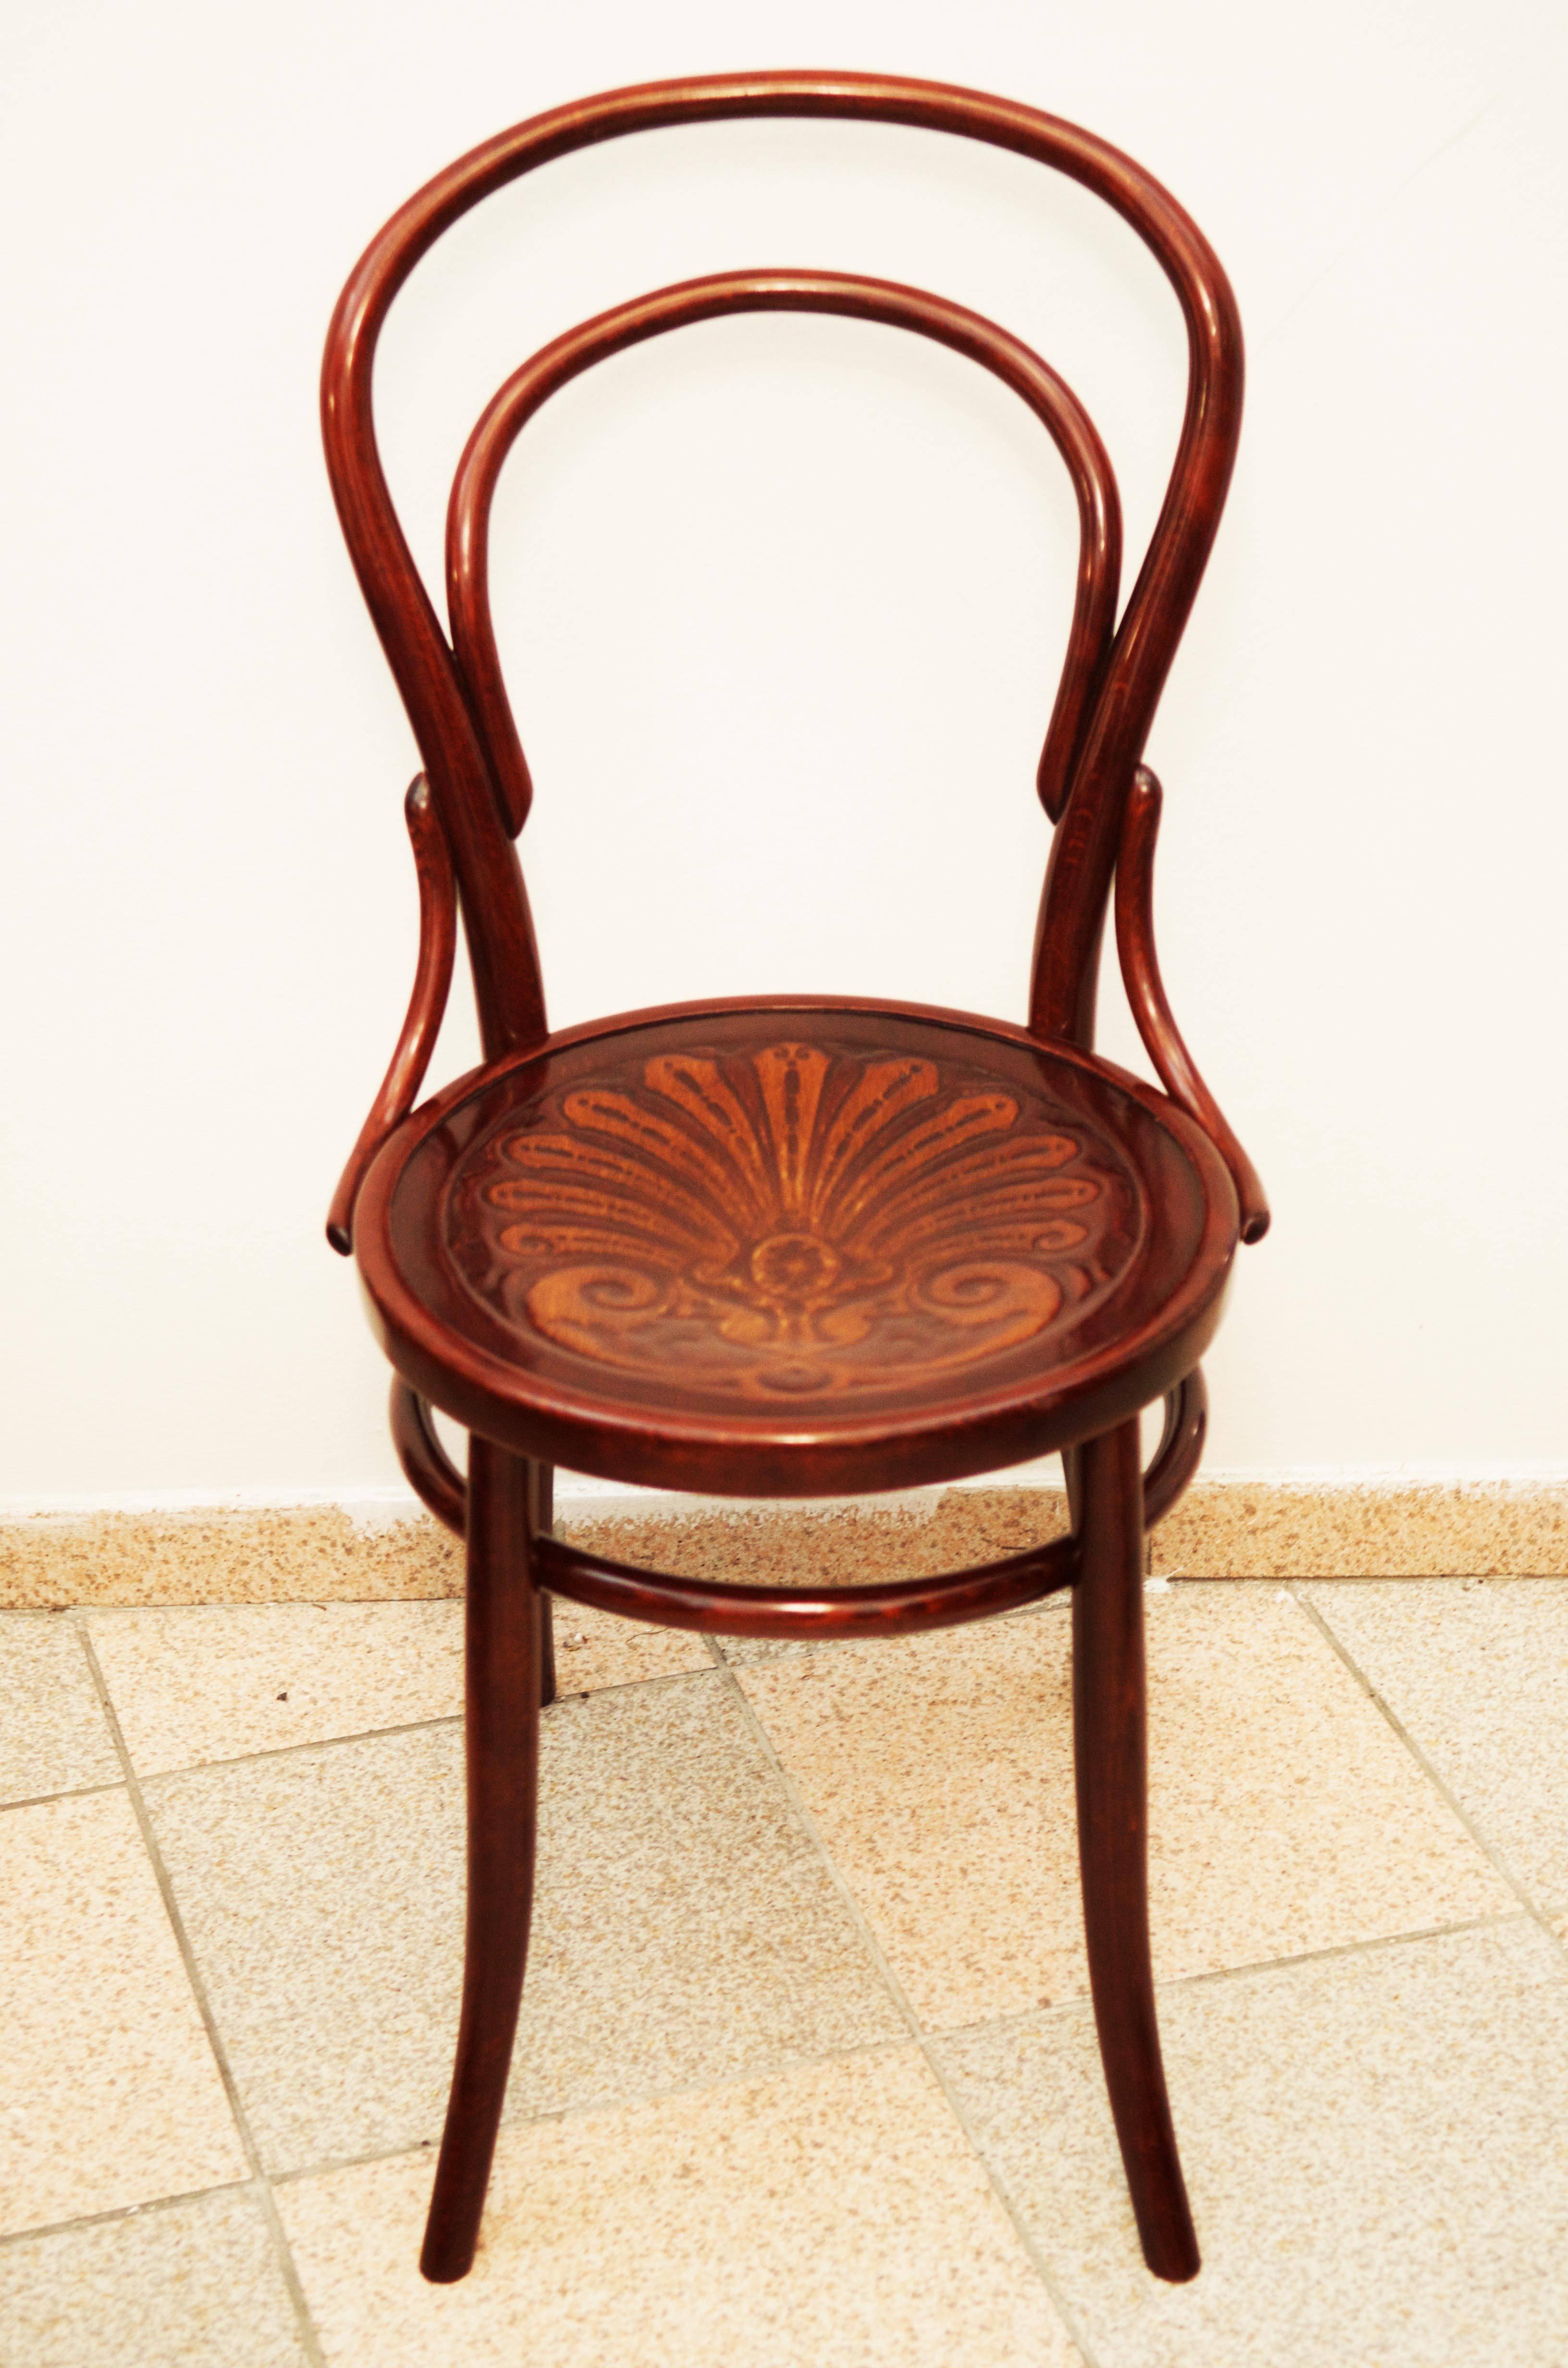 Vienna Secession Bentwood Chairs Attributed to Thonet For Sale